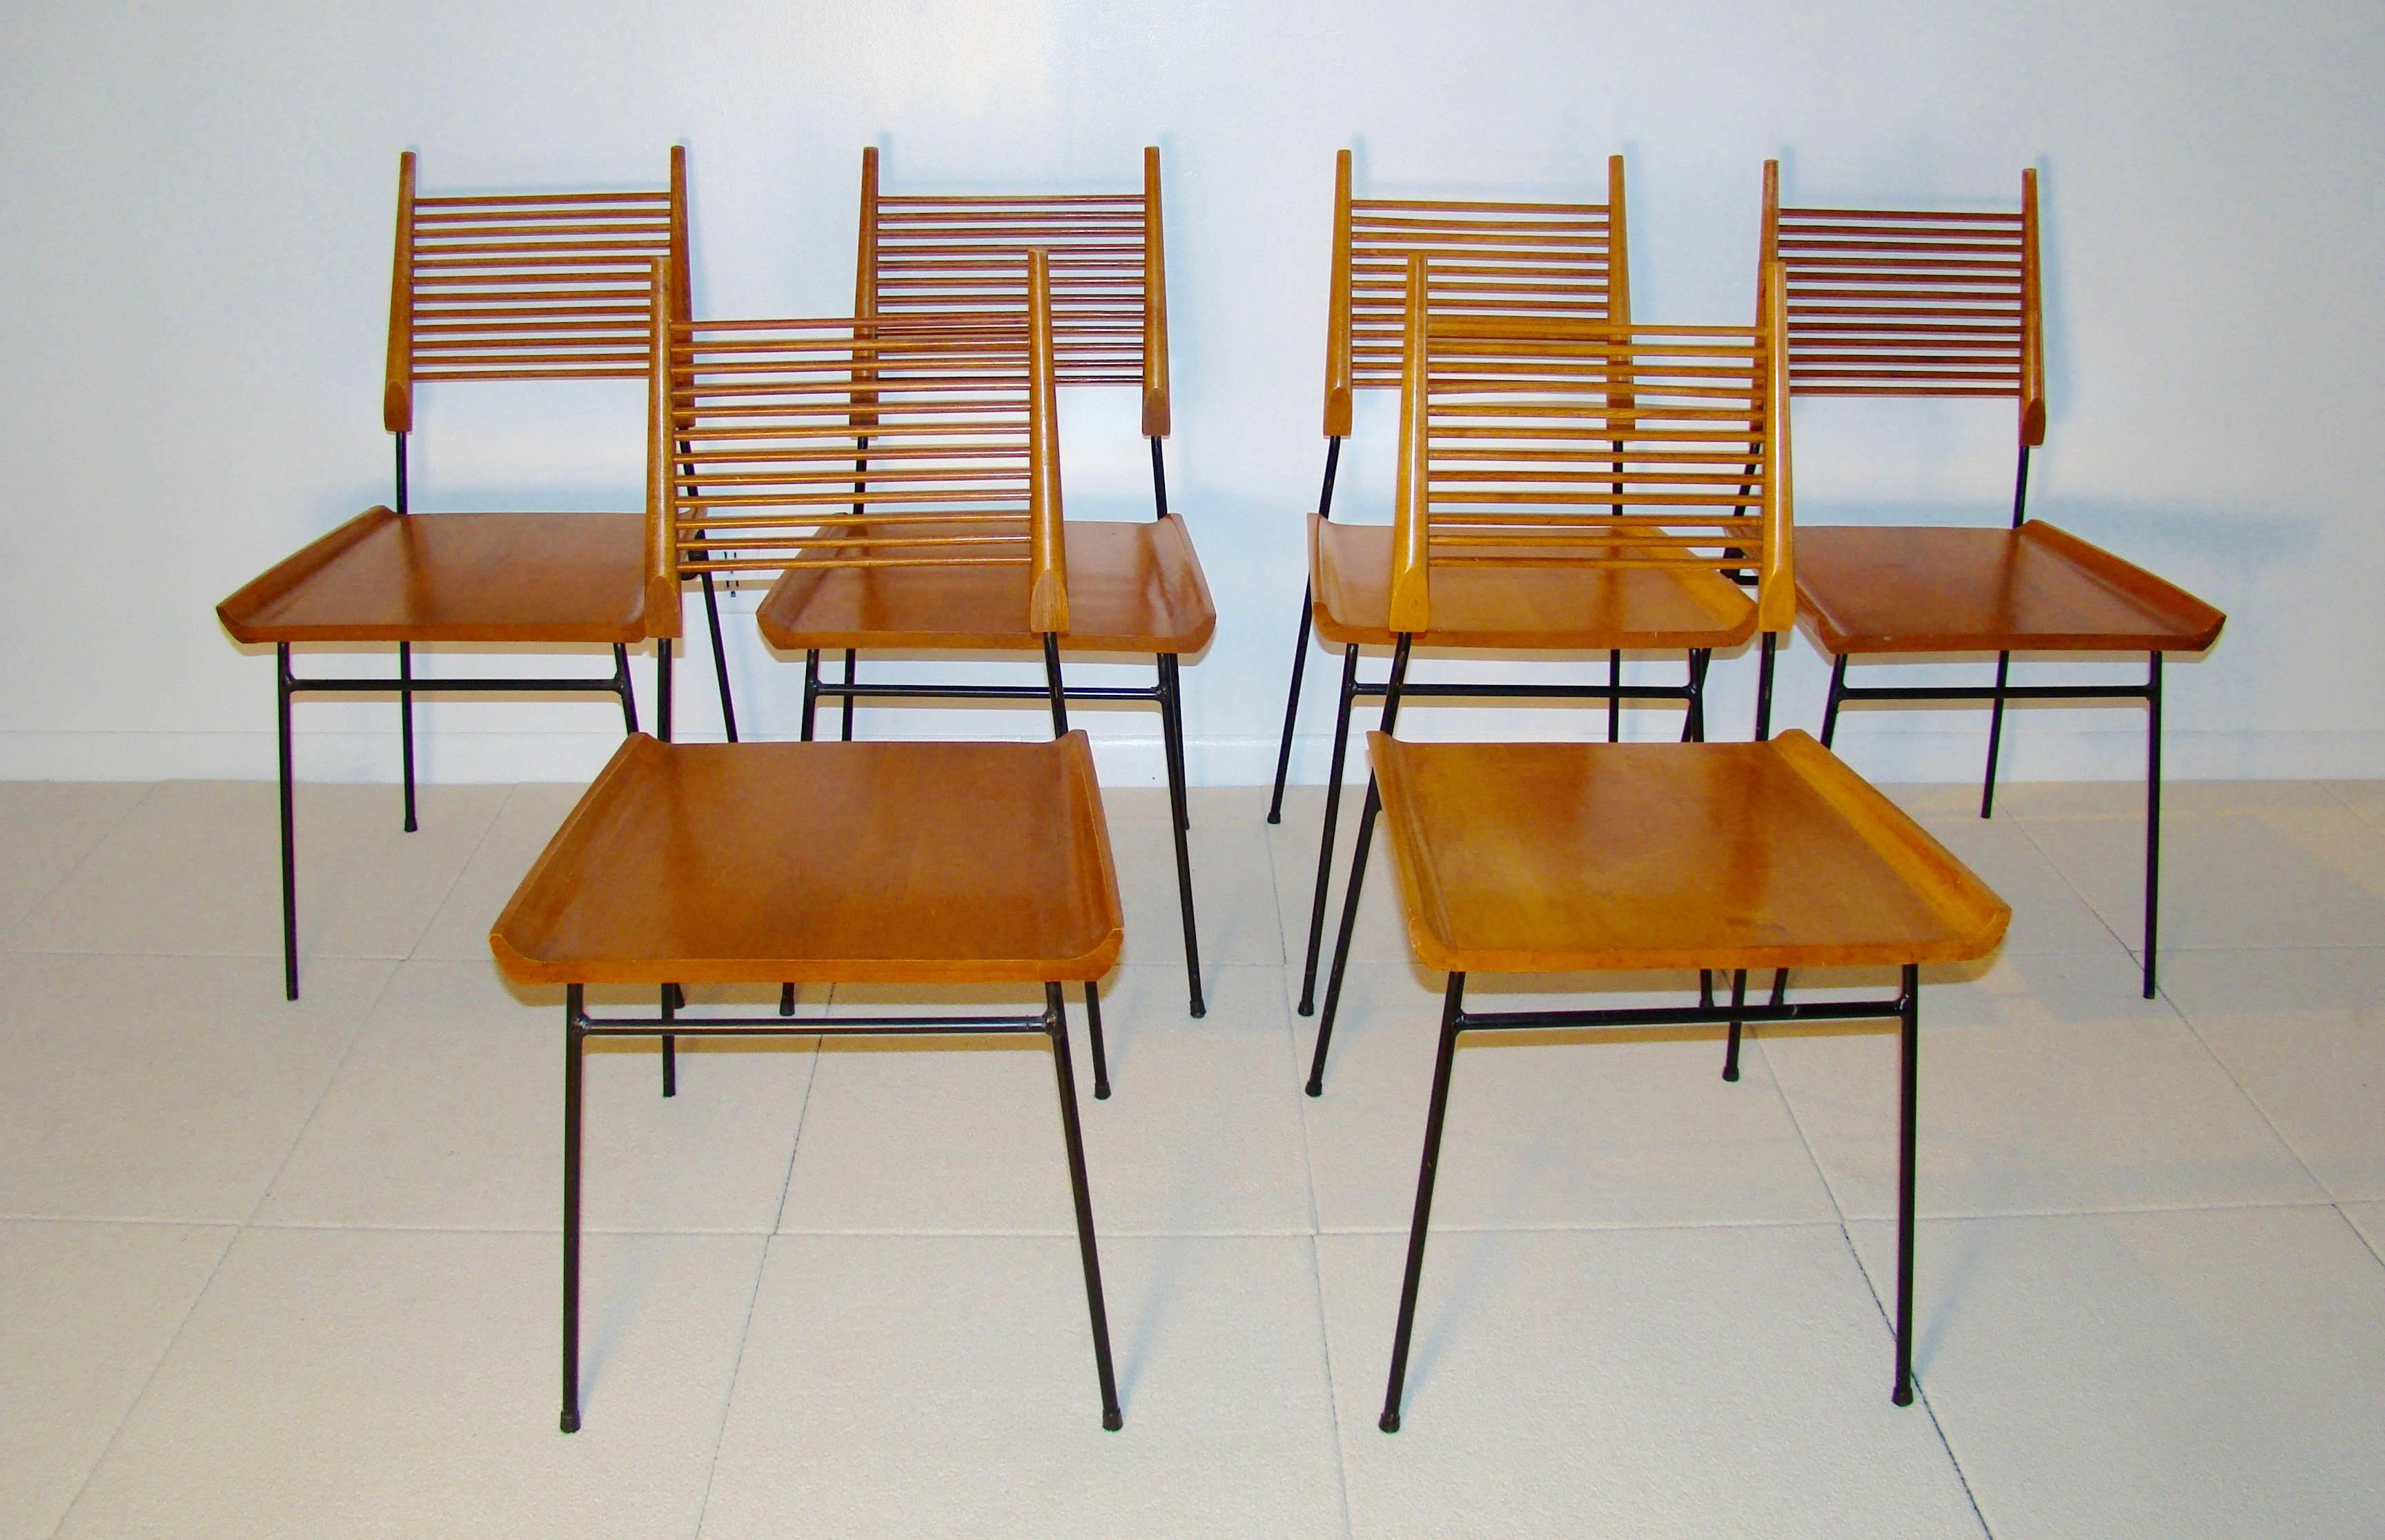 Exquisite set of six Paul McCobb wrought iron and maple ladder back or shovel chairs for Winchendon, circa 1950s. Beautiful form, comfortable. Arguably, one of Paul McCobbs' most brilliant designs.

This set of six chairs is in exceptional